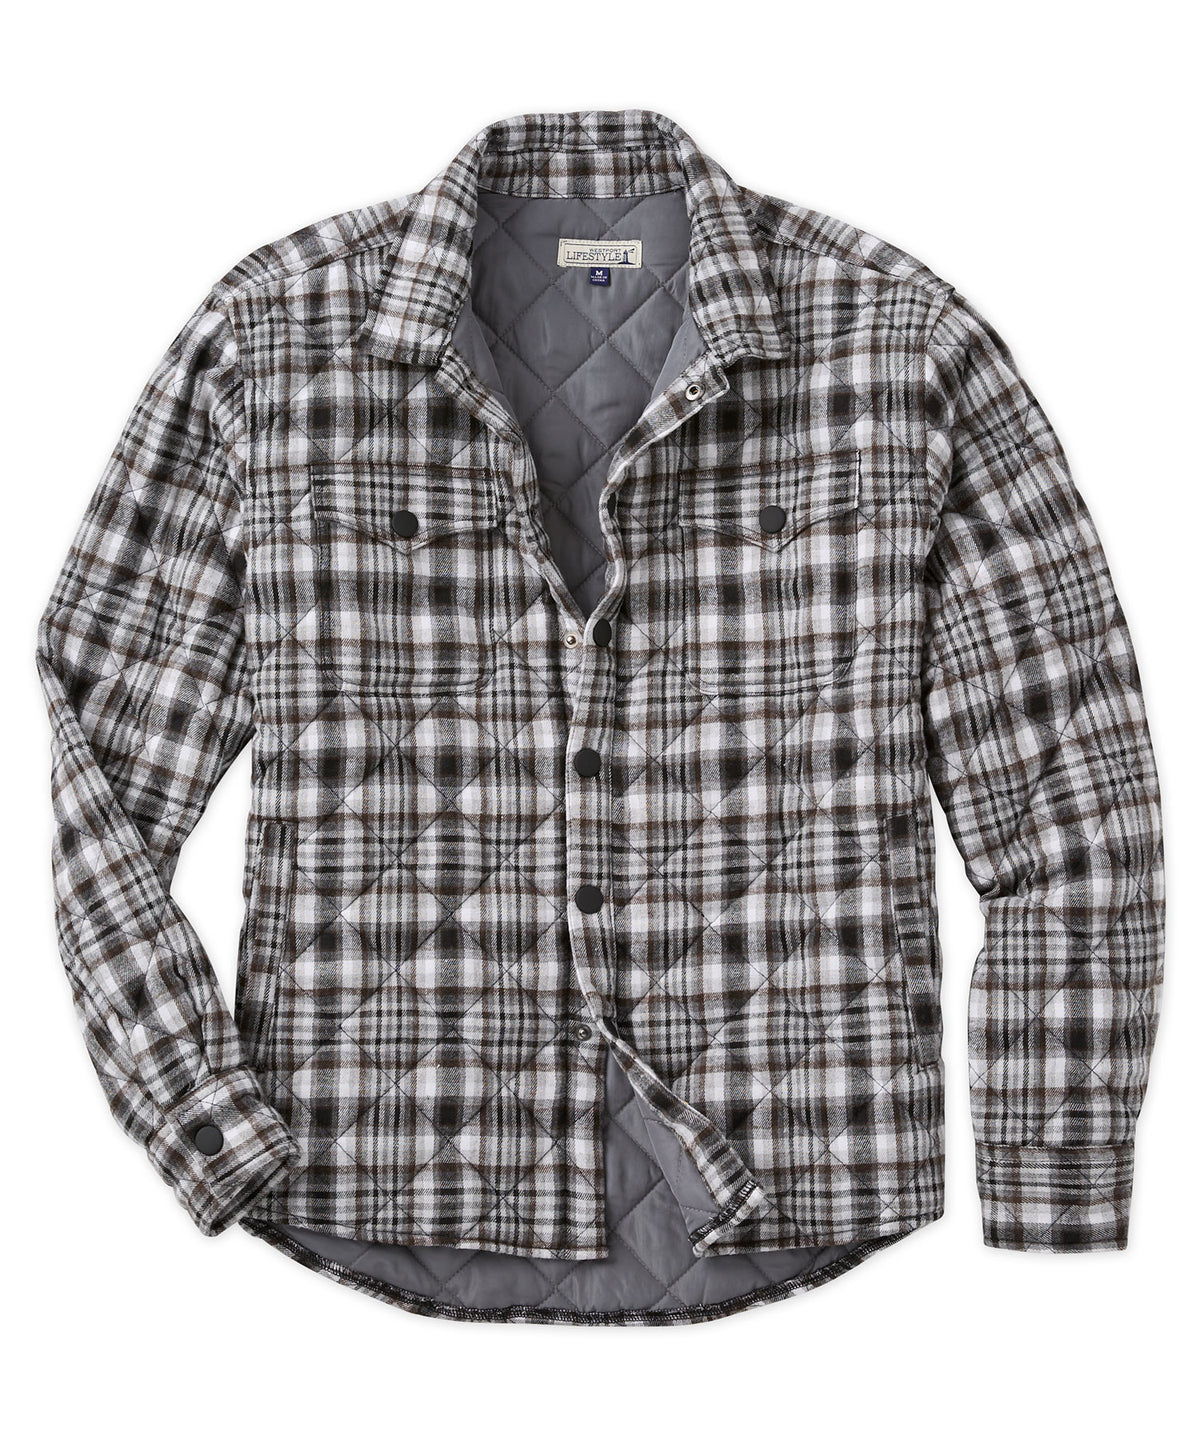 Giacca camicia in flanella scozzese Westport Lifestyle Firepit, Men's Big & Tall